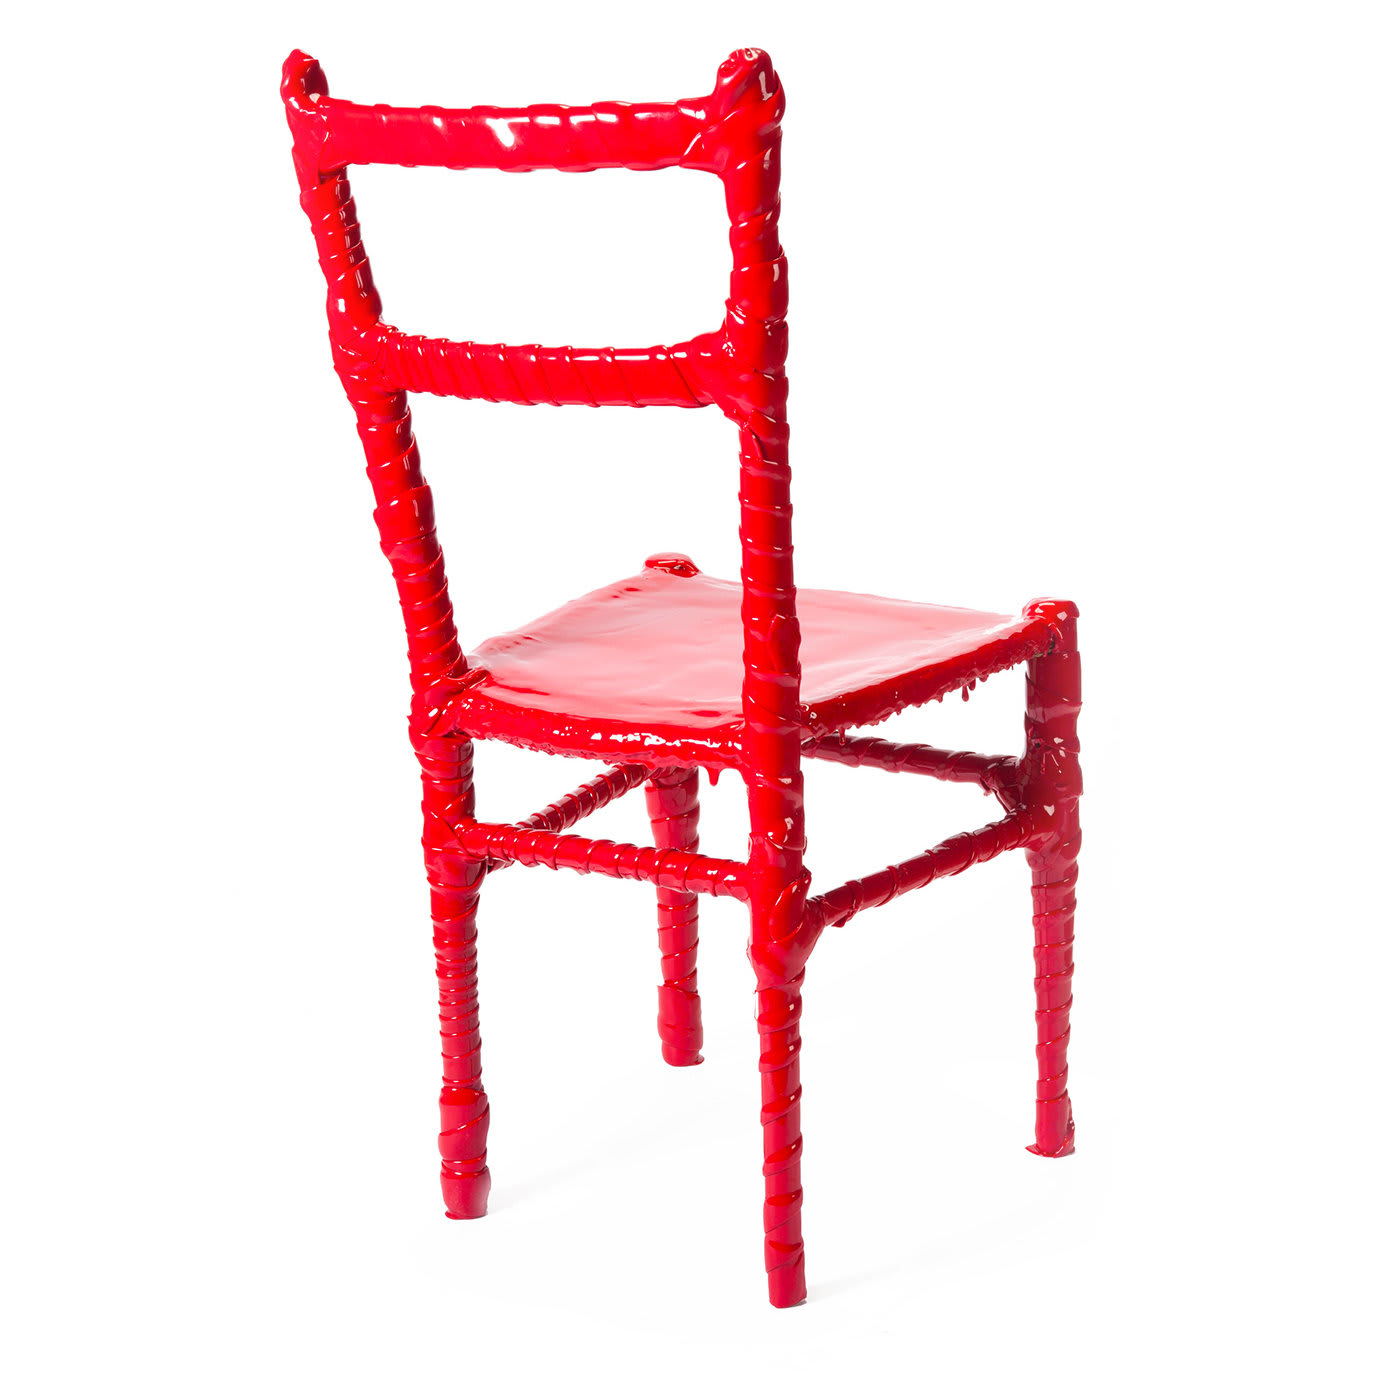 N. 03/20 One-Off chair by Paola Navone - Corsi Design Factory